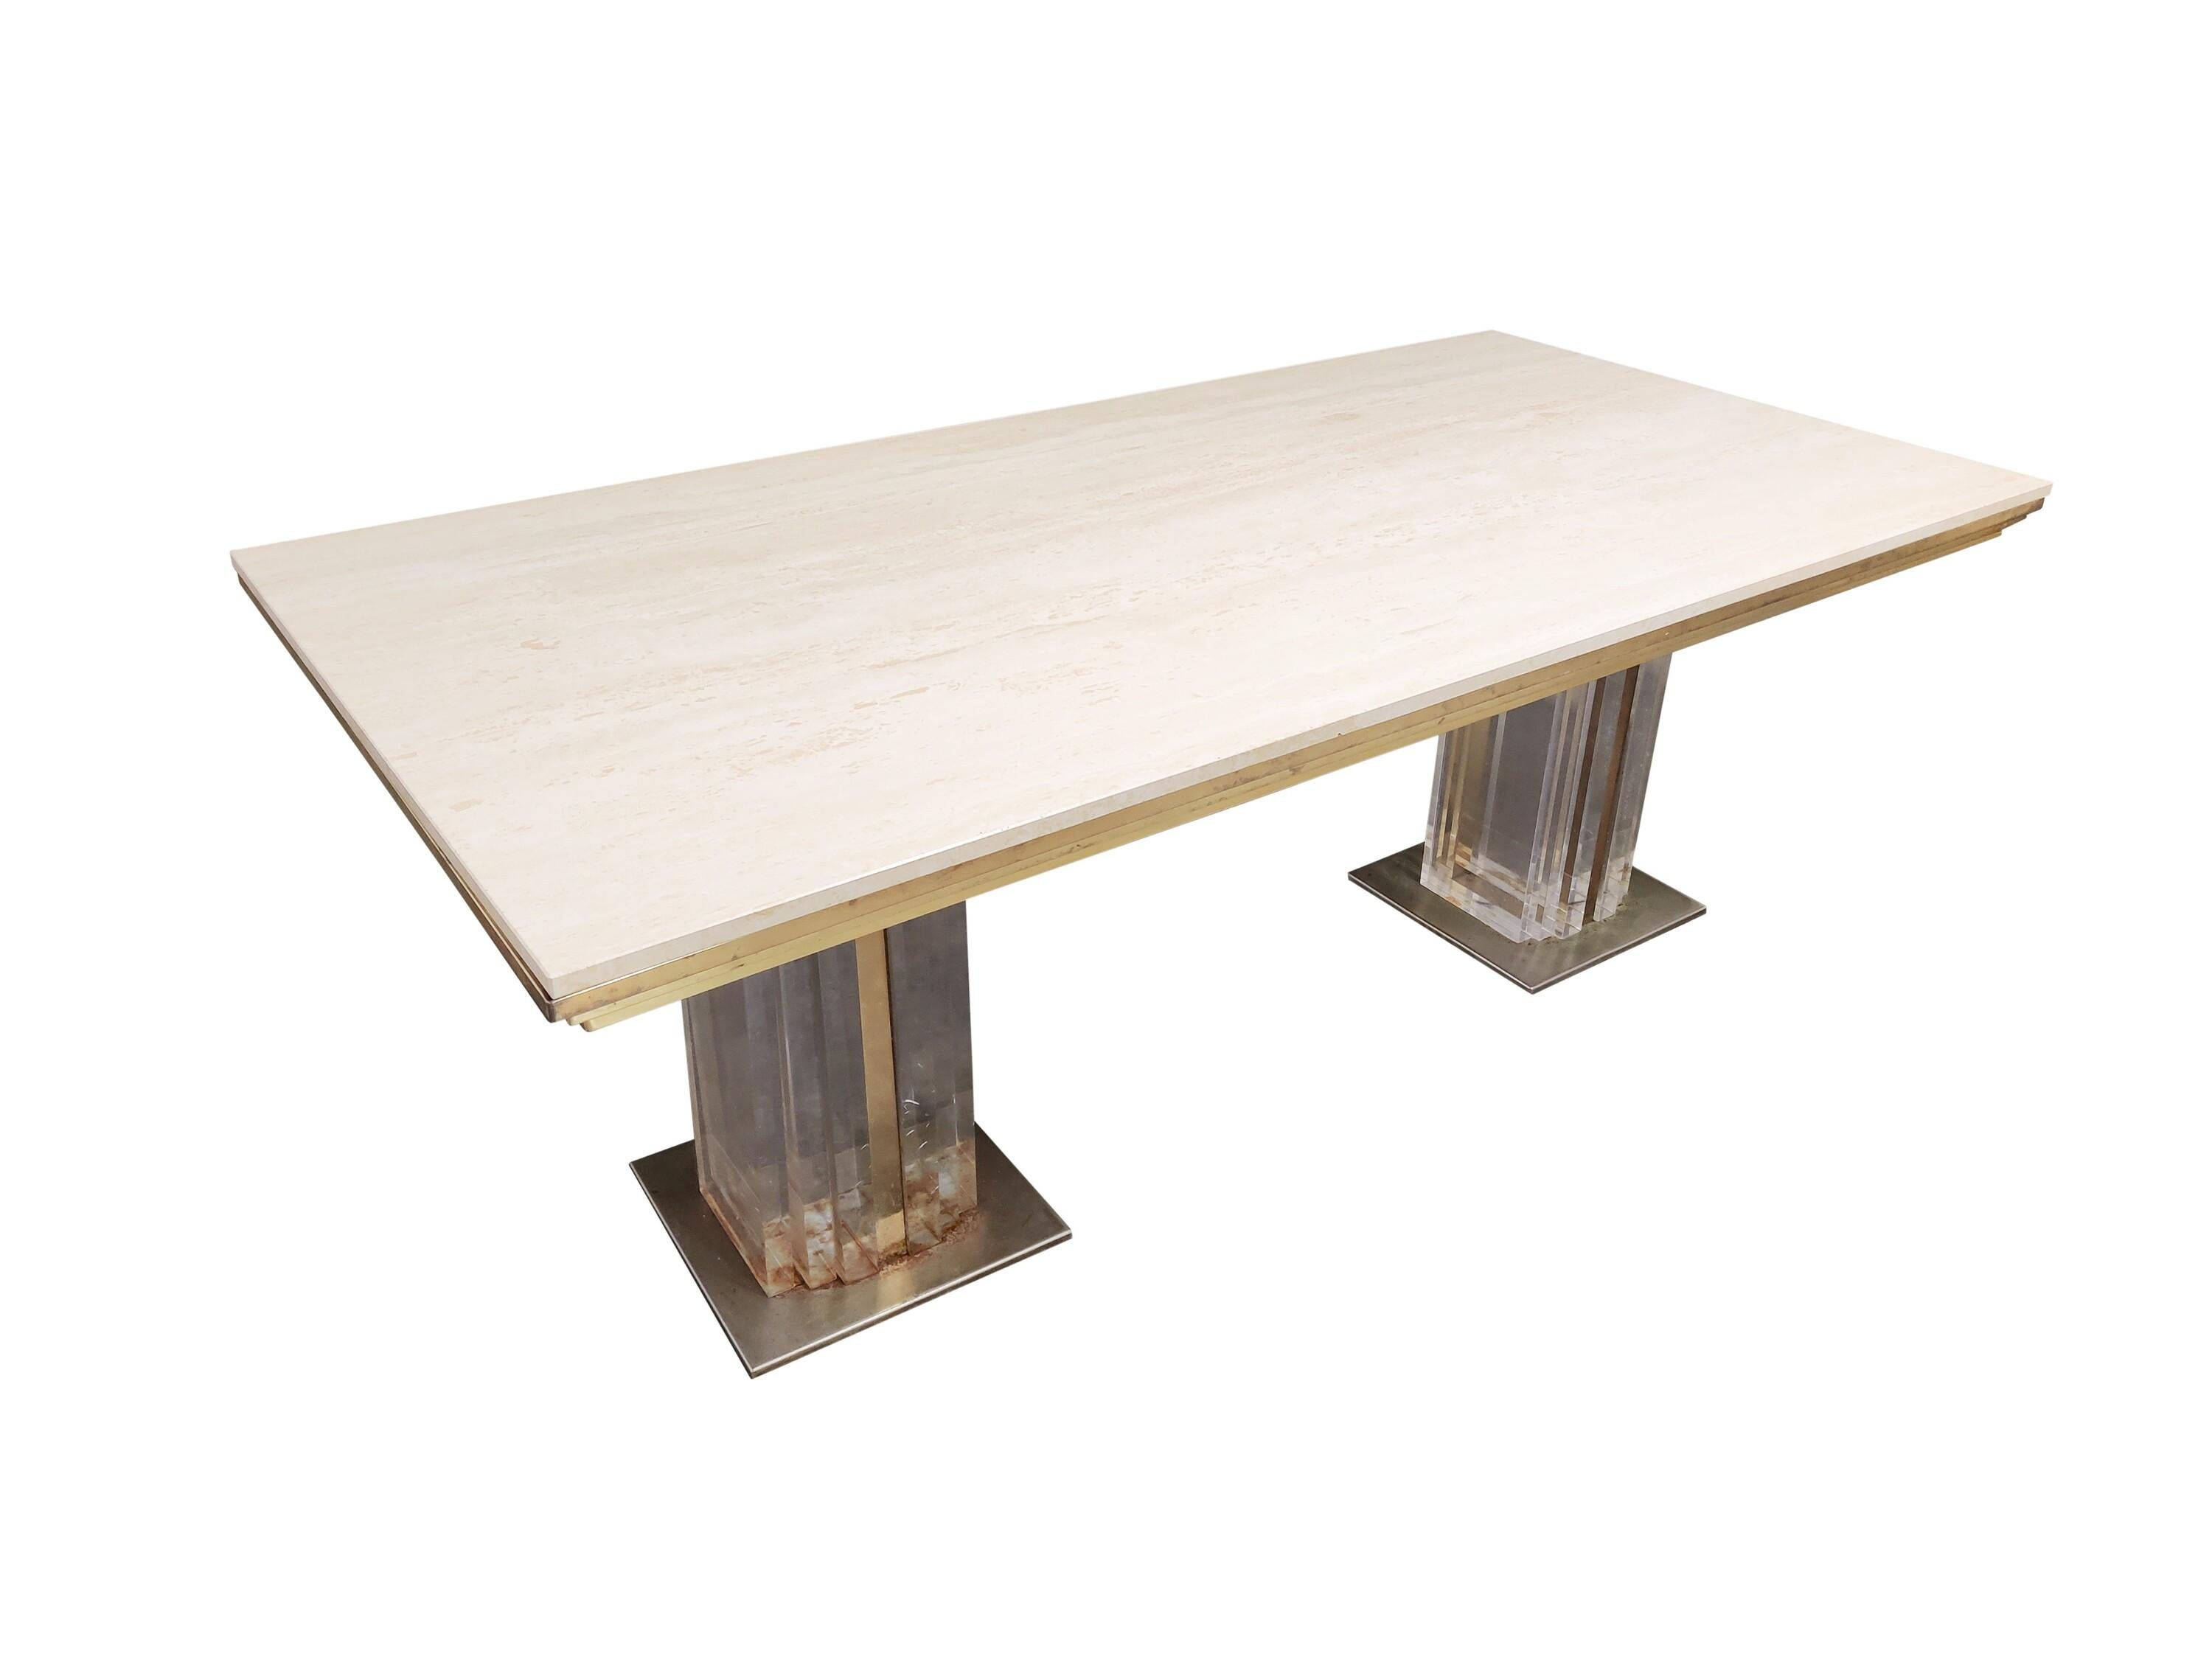 Vintage Lucite, Brass and Travertine Dining Table, 1970s For Sale 2